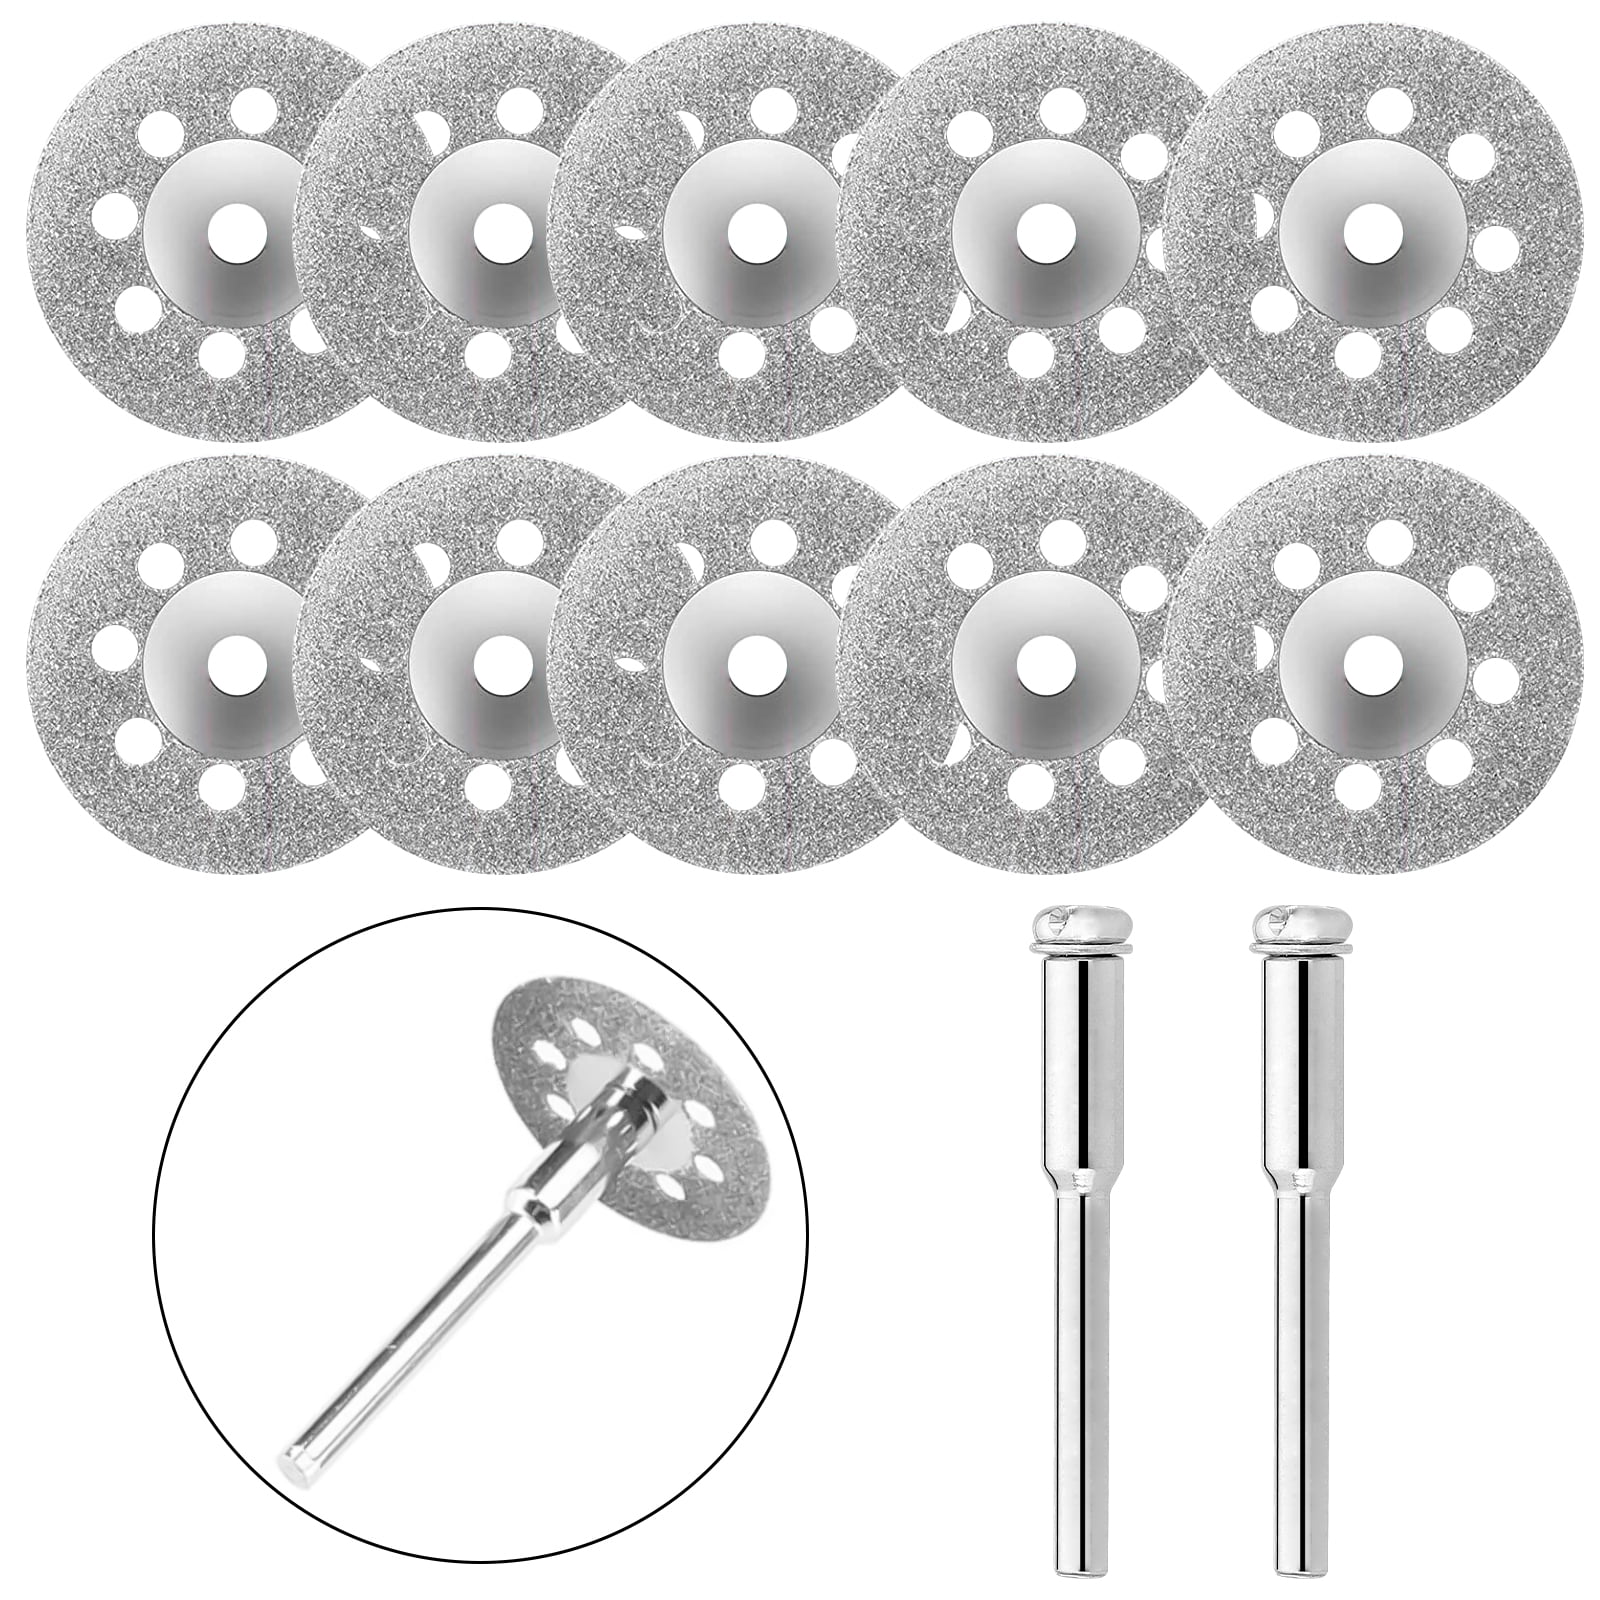 uxcell 10 Pcs 16mm Diamond Cutting Wheels Cut Off Discs with 2 Pcs Mandrels for Rotary Tool 